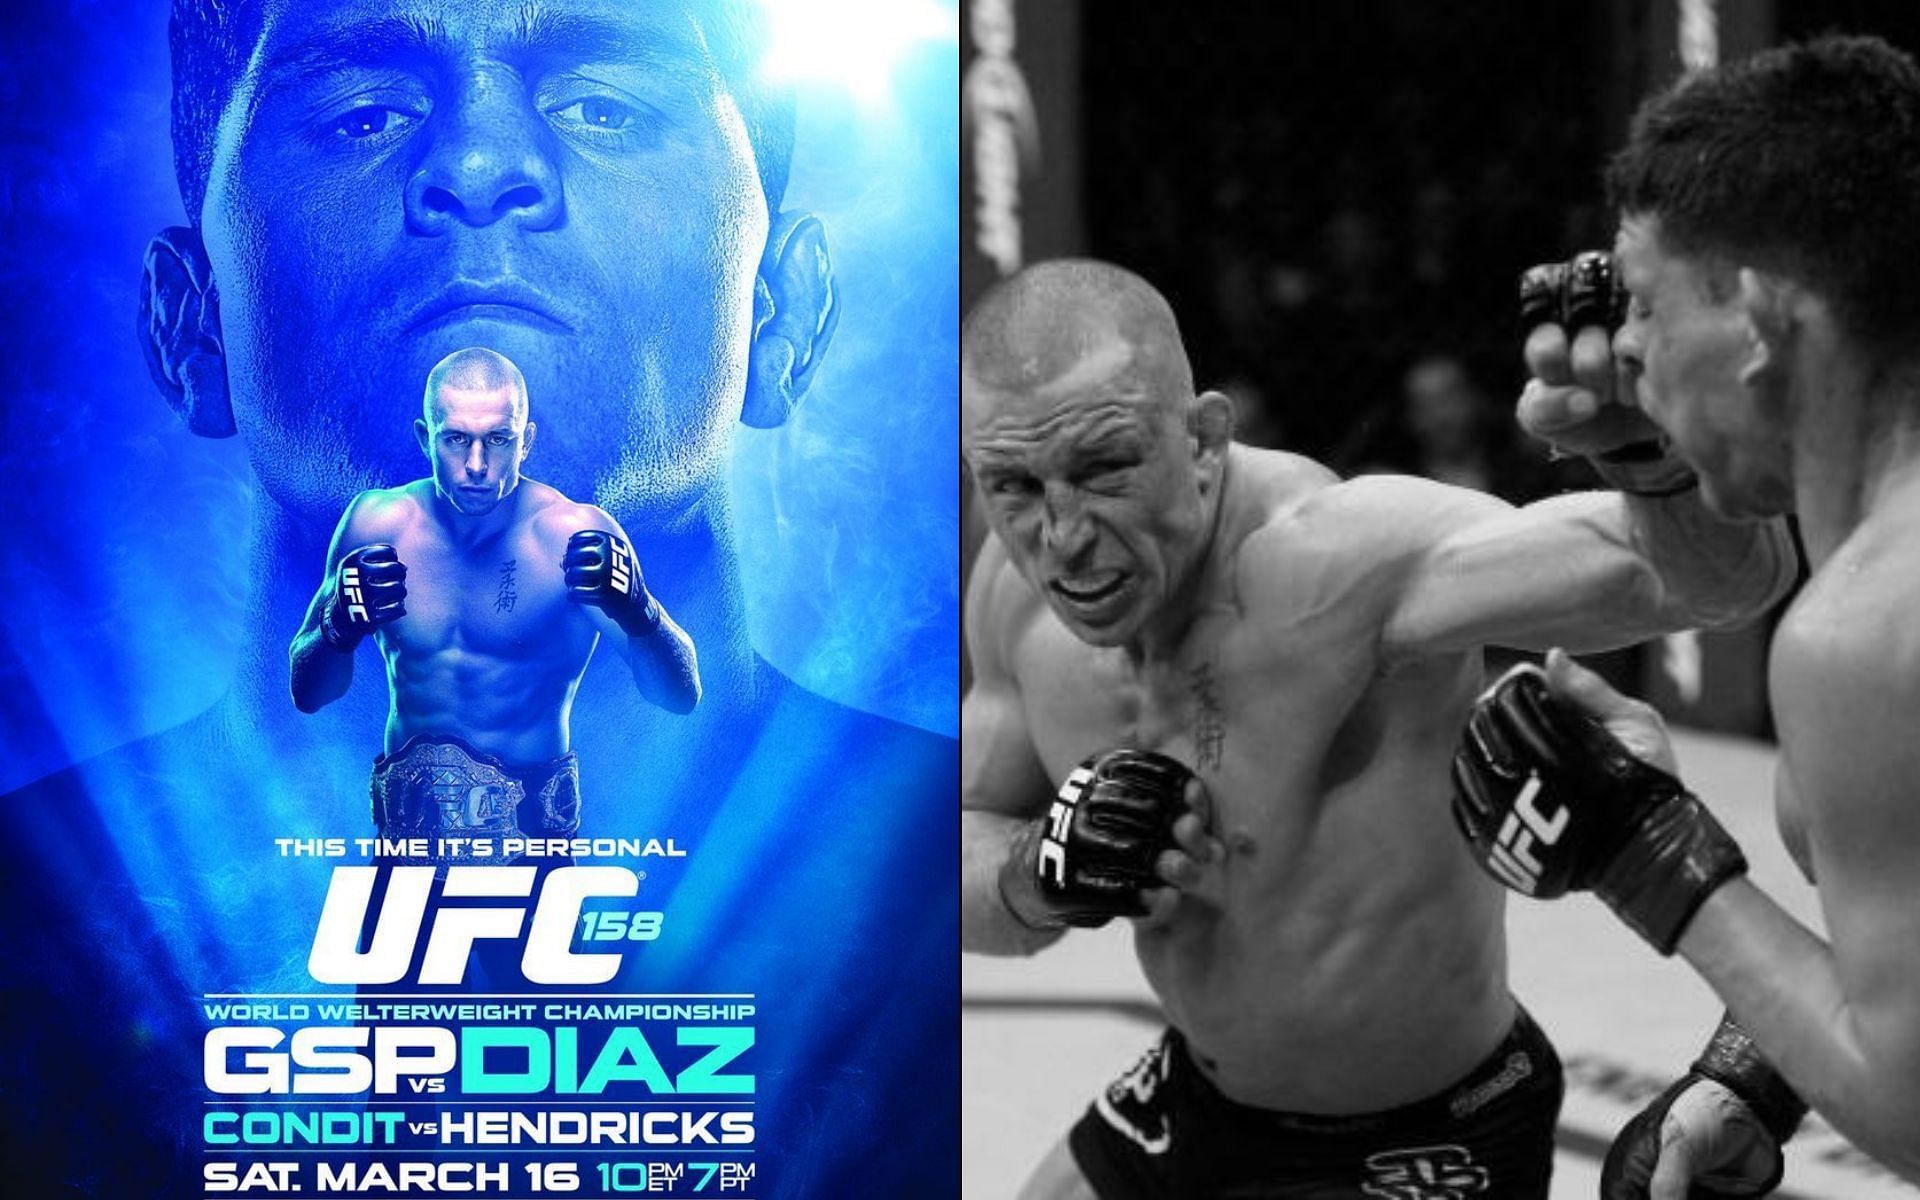 UFC 158 poster [Left], and Georges St-Pierre vs. Nick Diaz [Right] [Photo credit: @MMAHistoryToday and @FUELTV - Twitter]